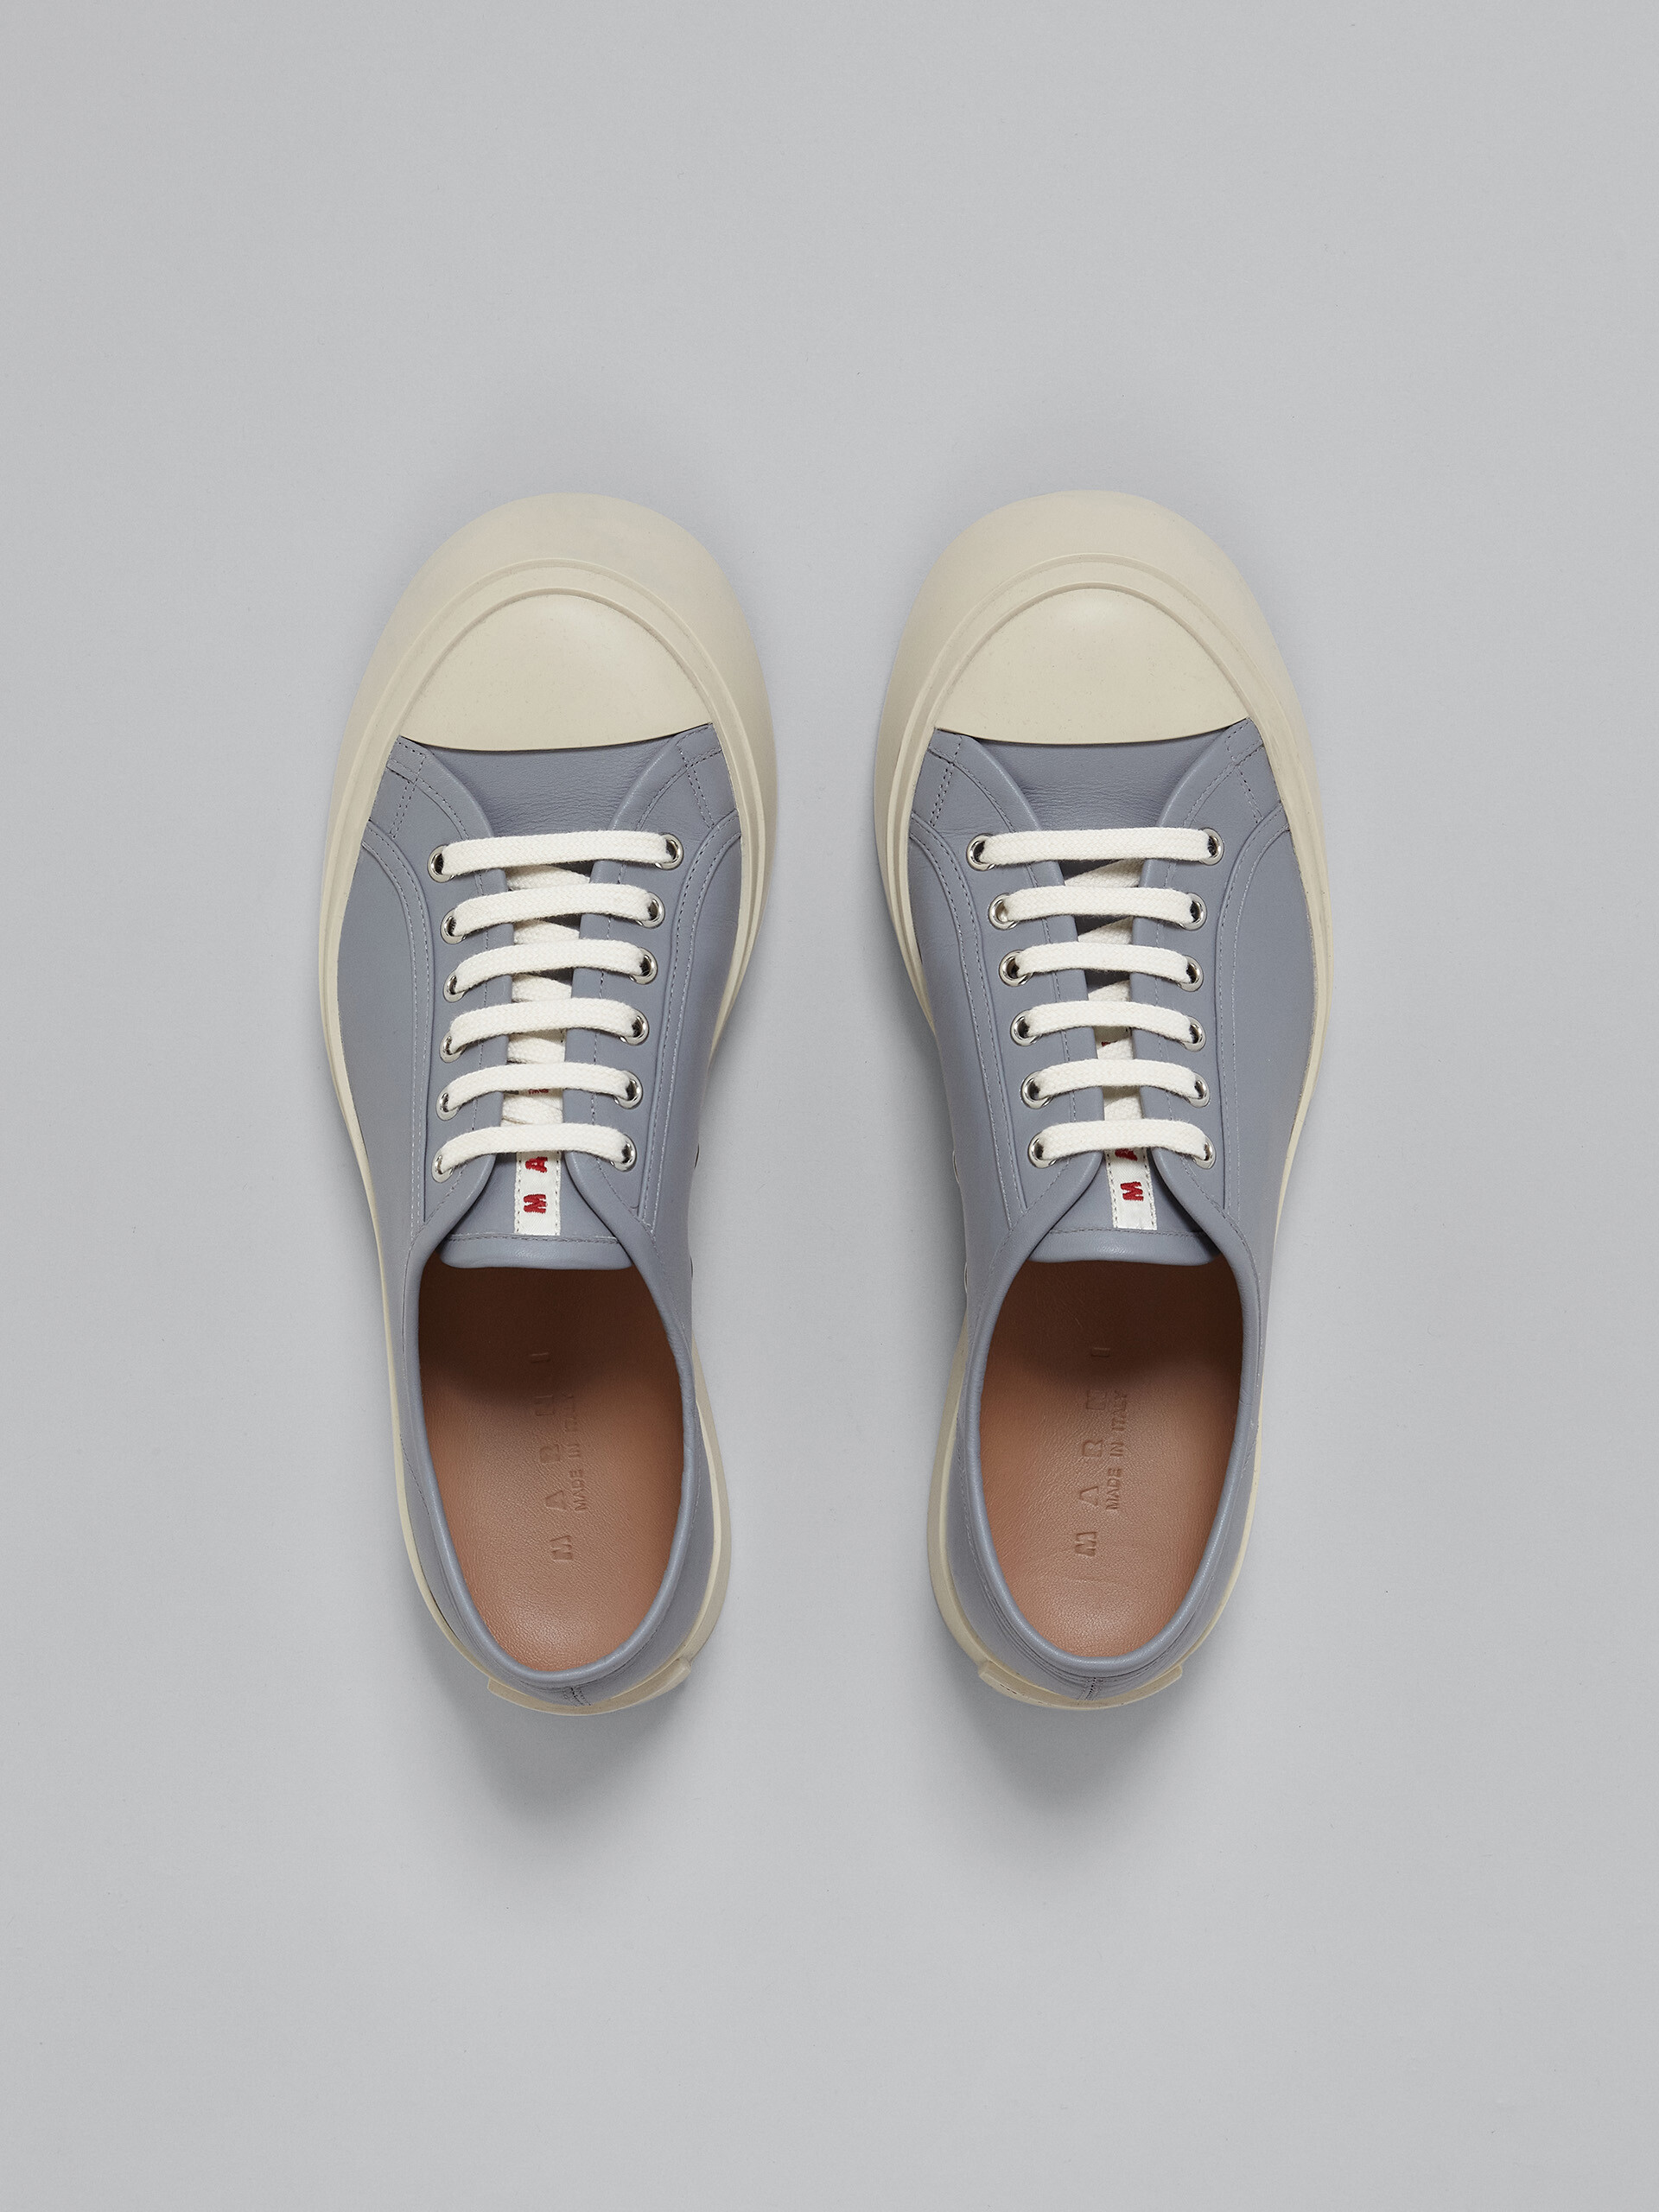 Grey nappa leather PABLO sneaker - Sneakers - Image 4